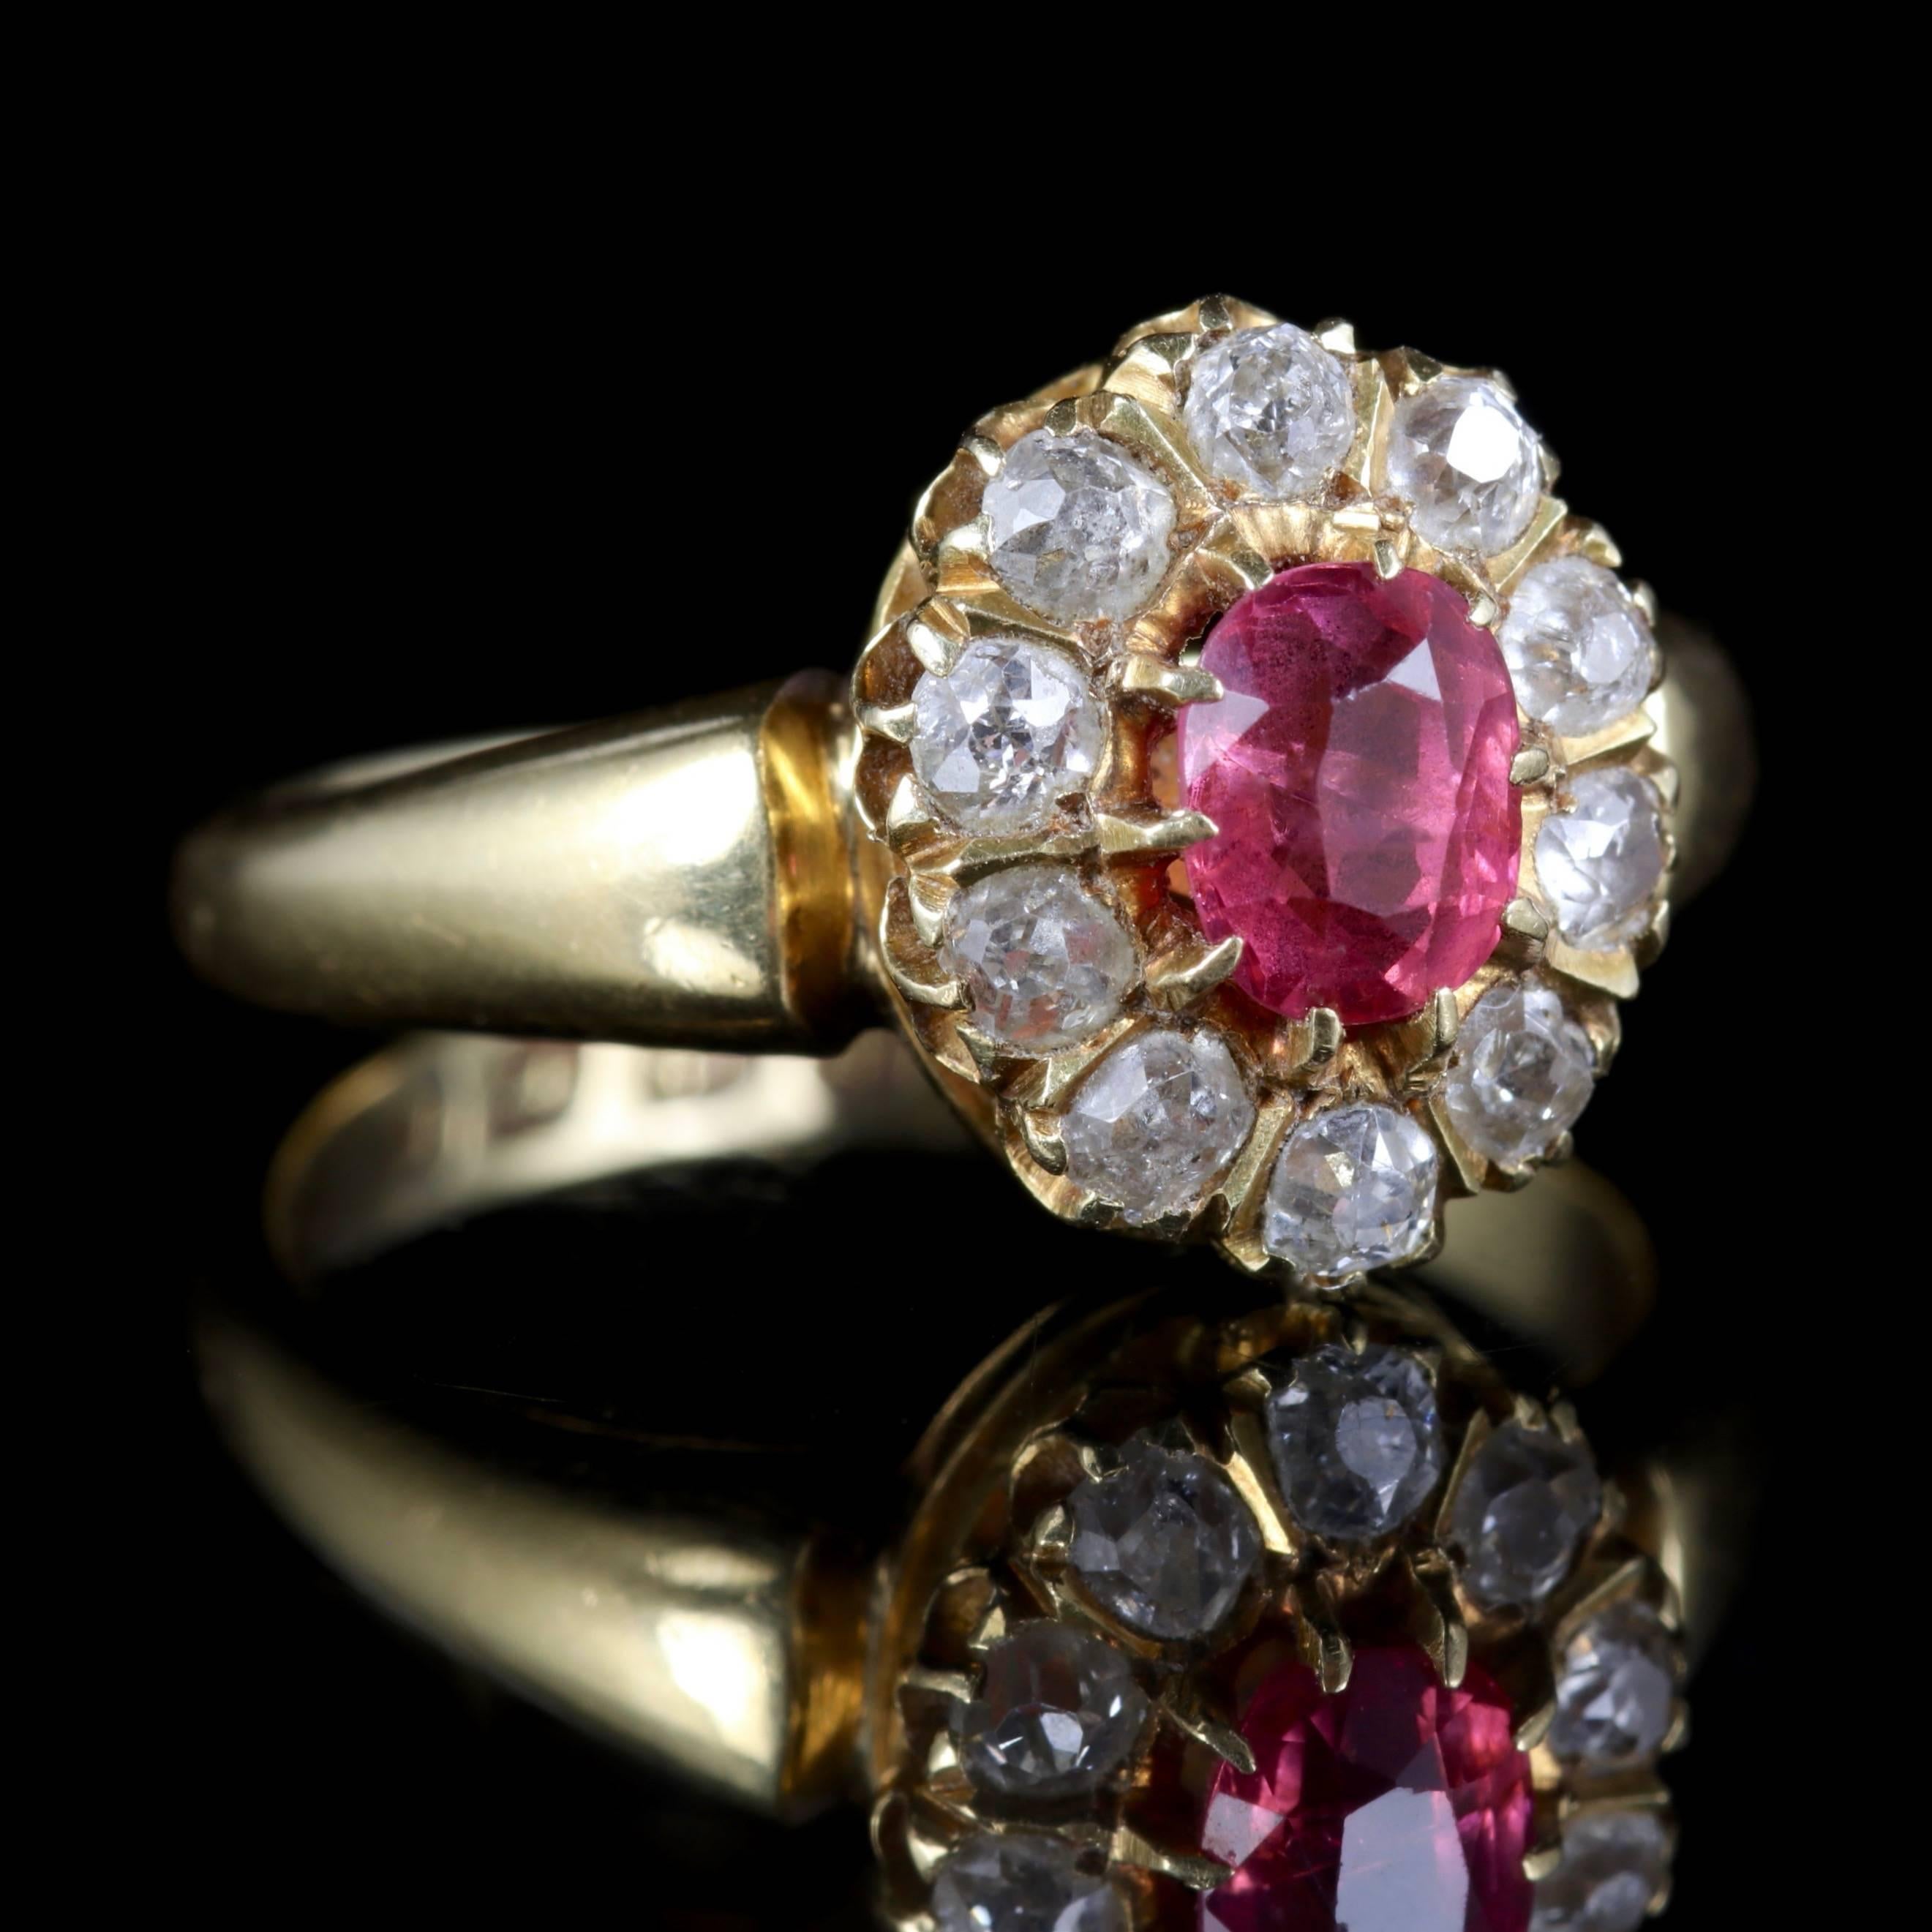 This fabulous Victorian 18ct Yellow Gold ring is dated Birmingham 1891. 

A 0.80ct Pink Sapphire is set in the centre which is surrounded by sparkling cushion cut Diamonds.

Pink Sapphire is a stone of passion that brings joyful play to any